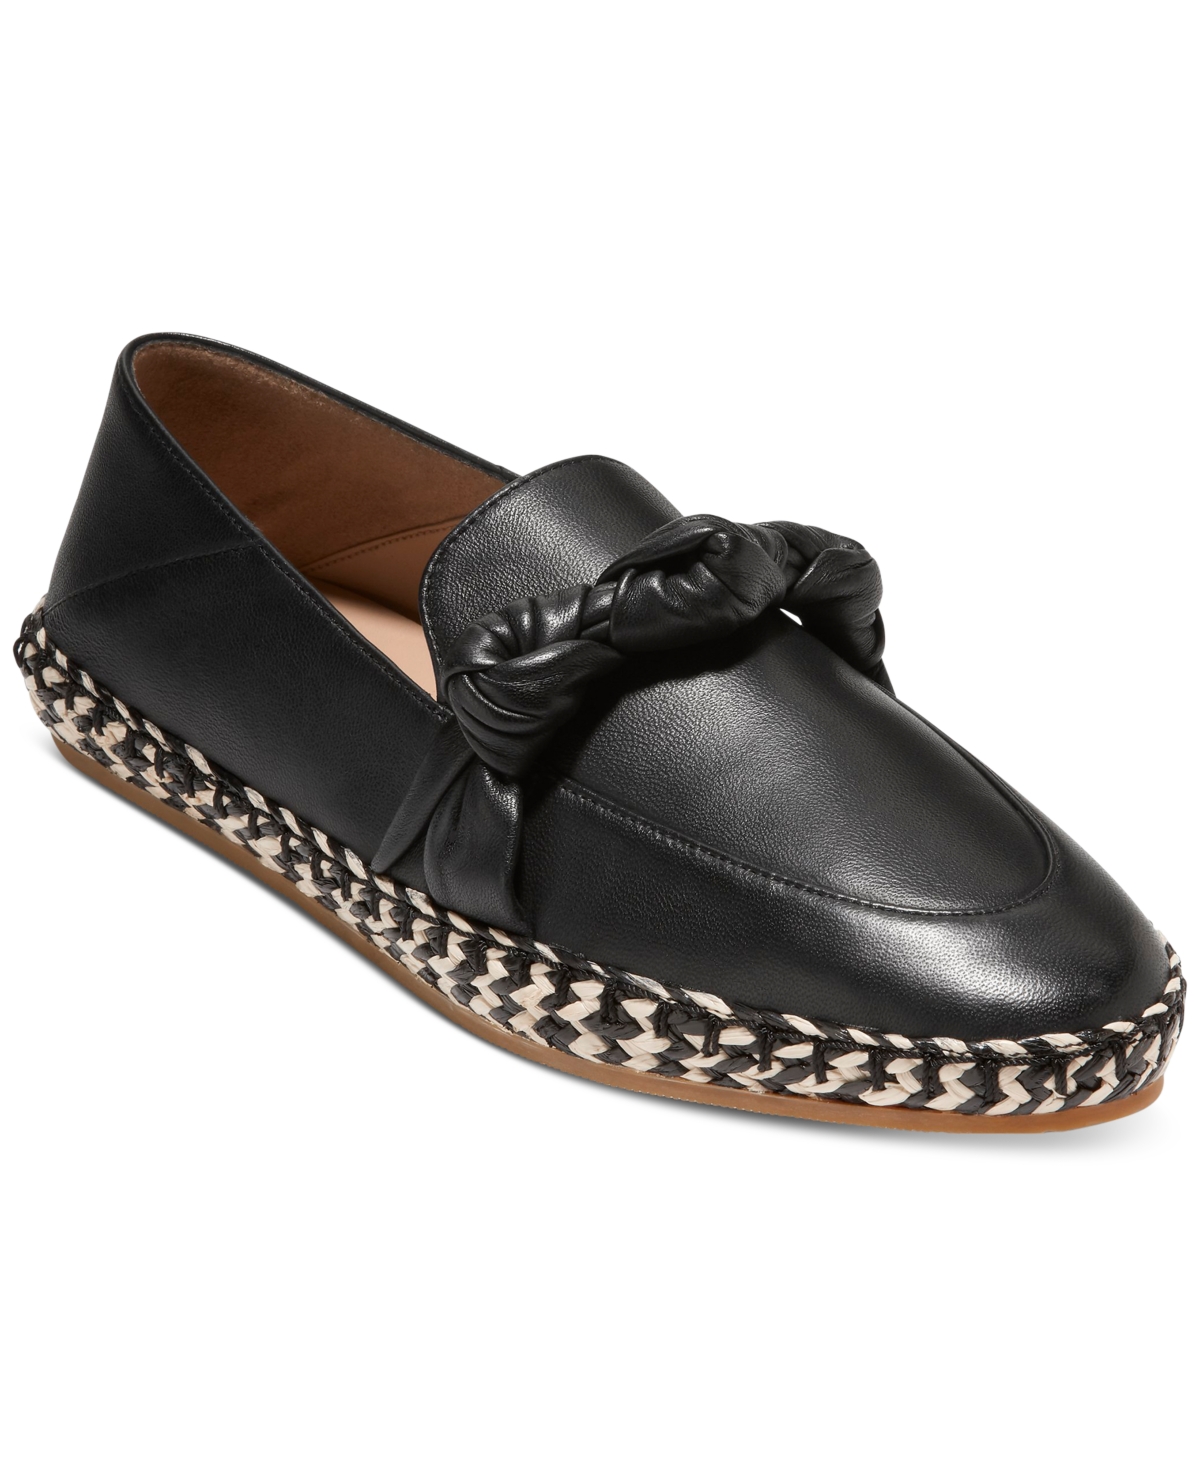 Cole Haan Women's Cloudfeel Knotted Espadrille Flats | Smart Closet